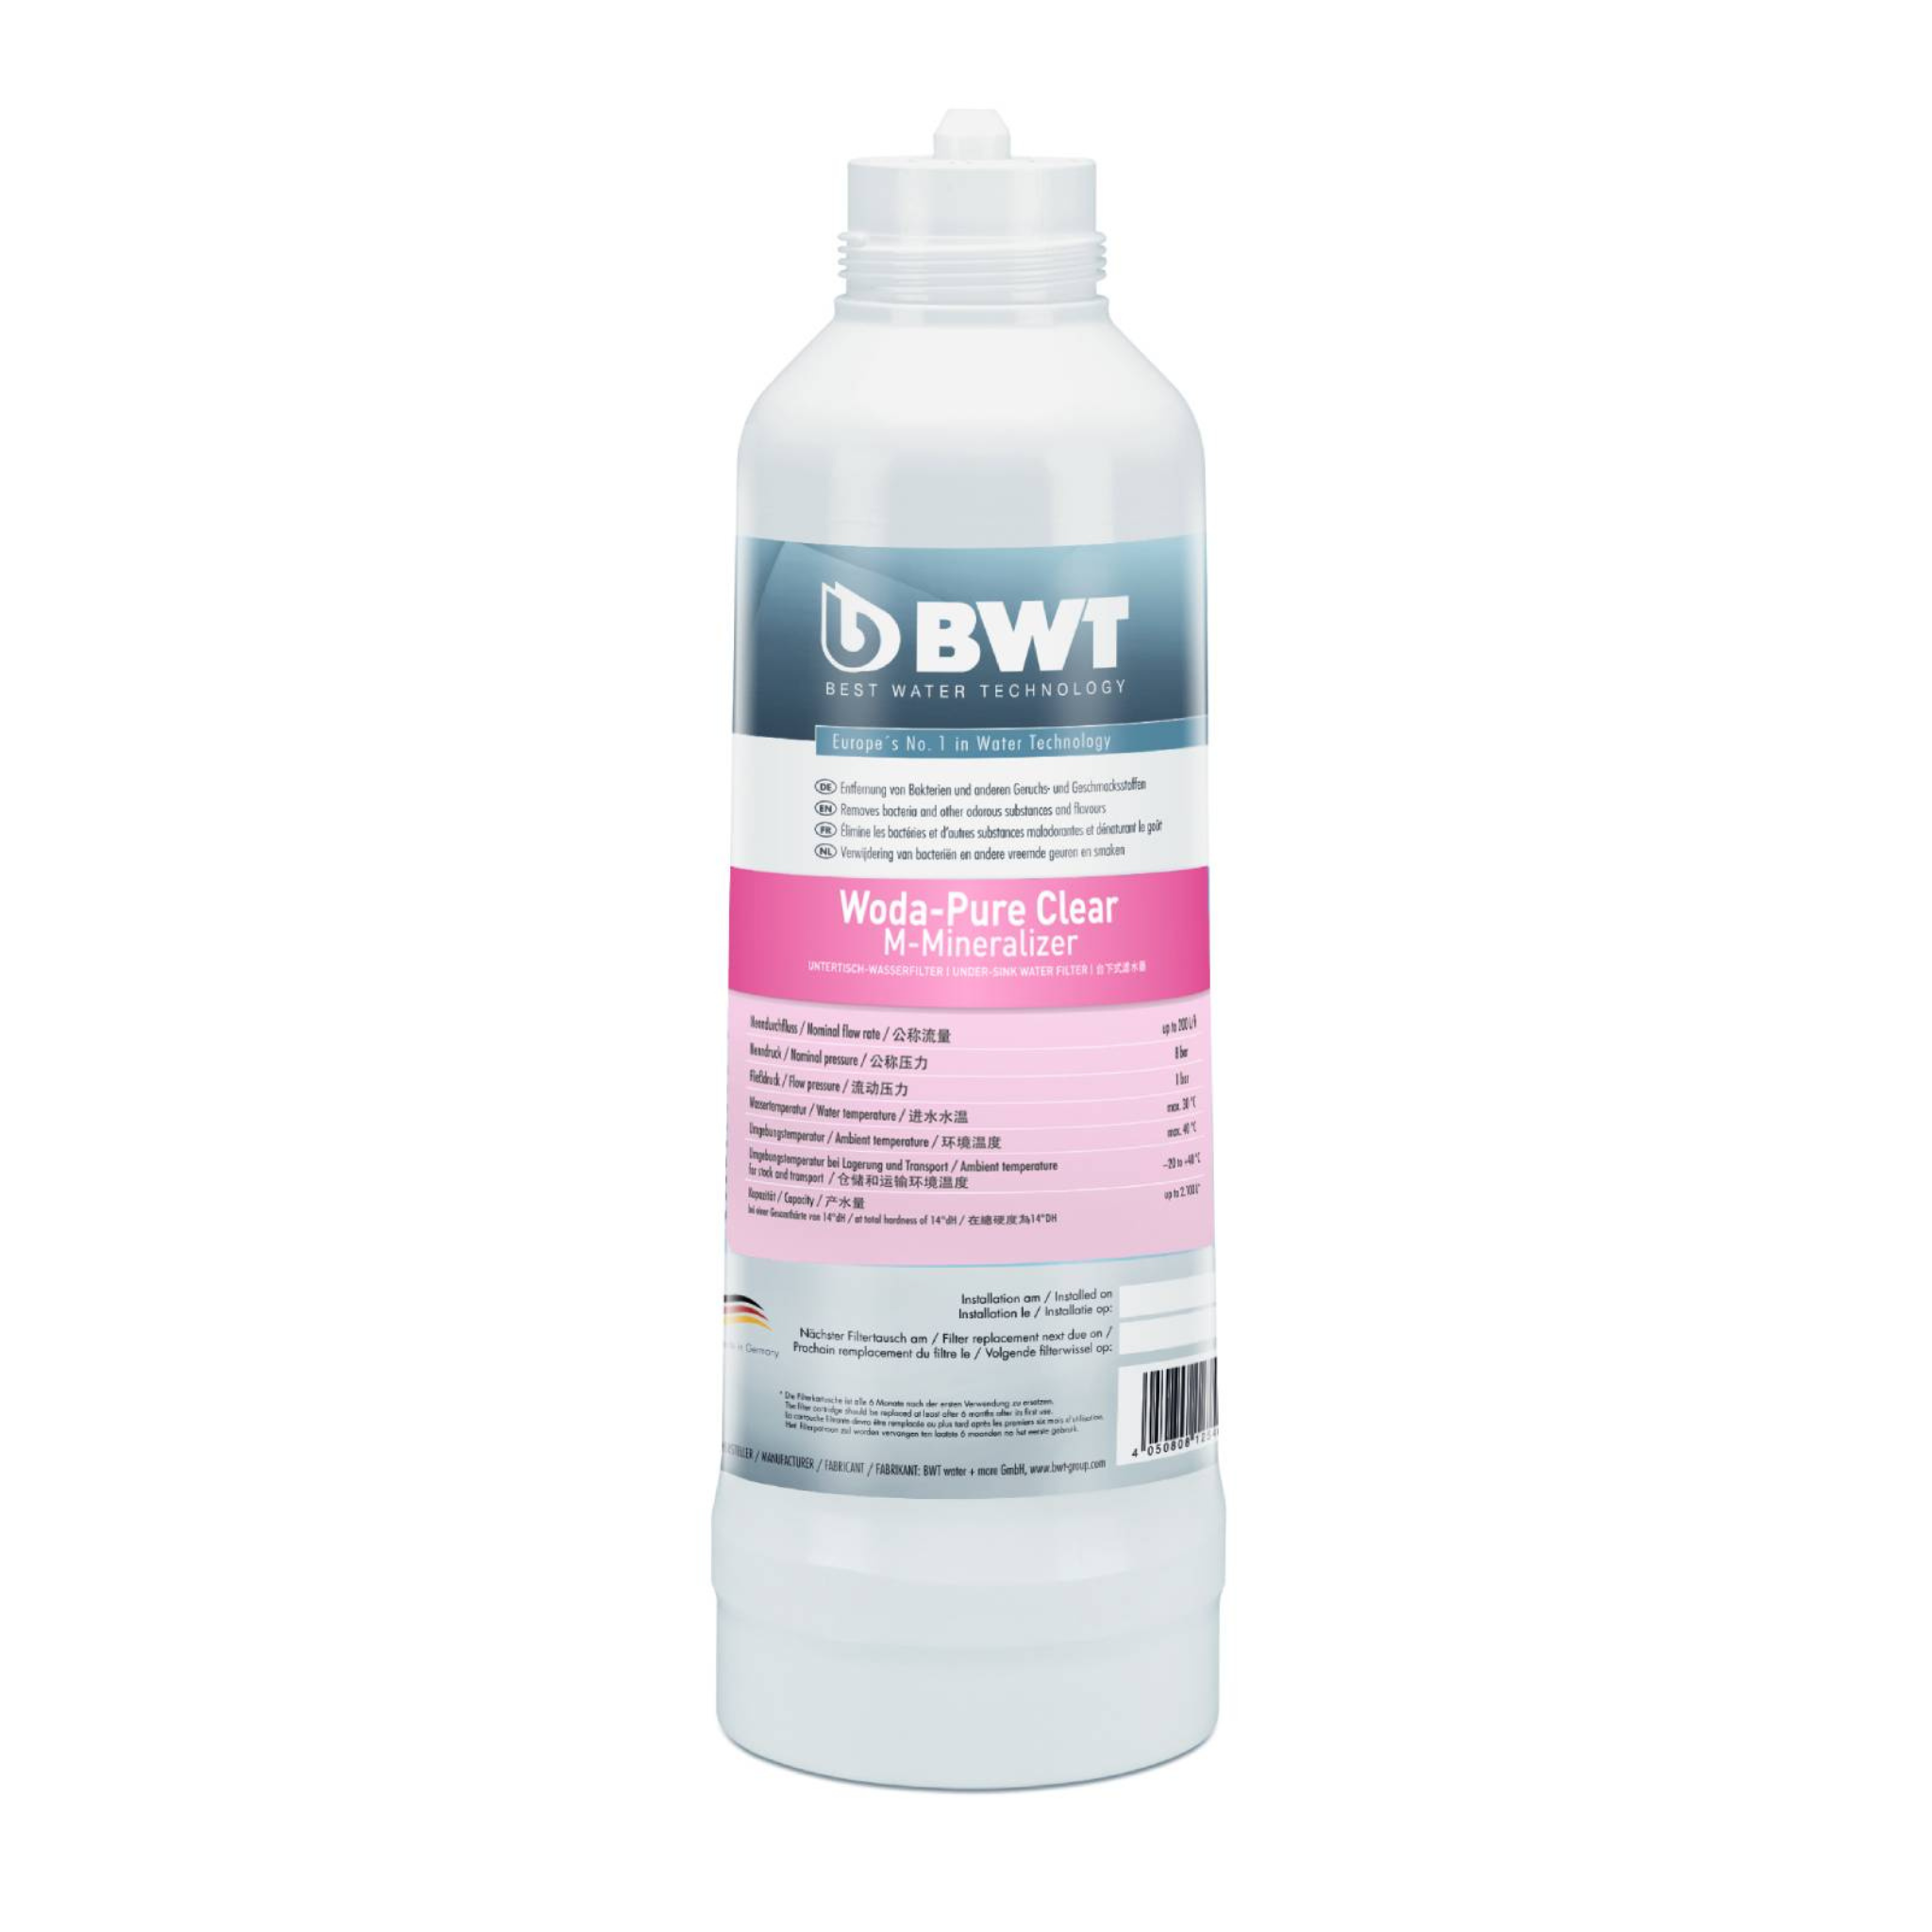 BWT Woda-Pure Clear Mineralizer | Adds Magnesium